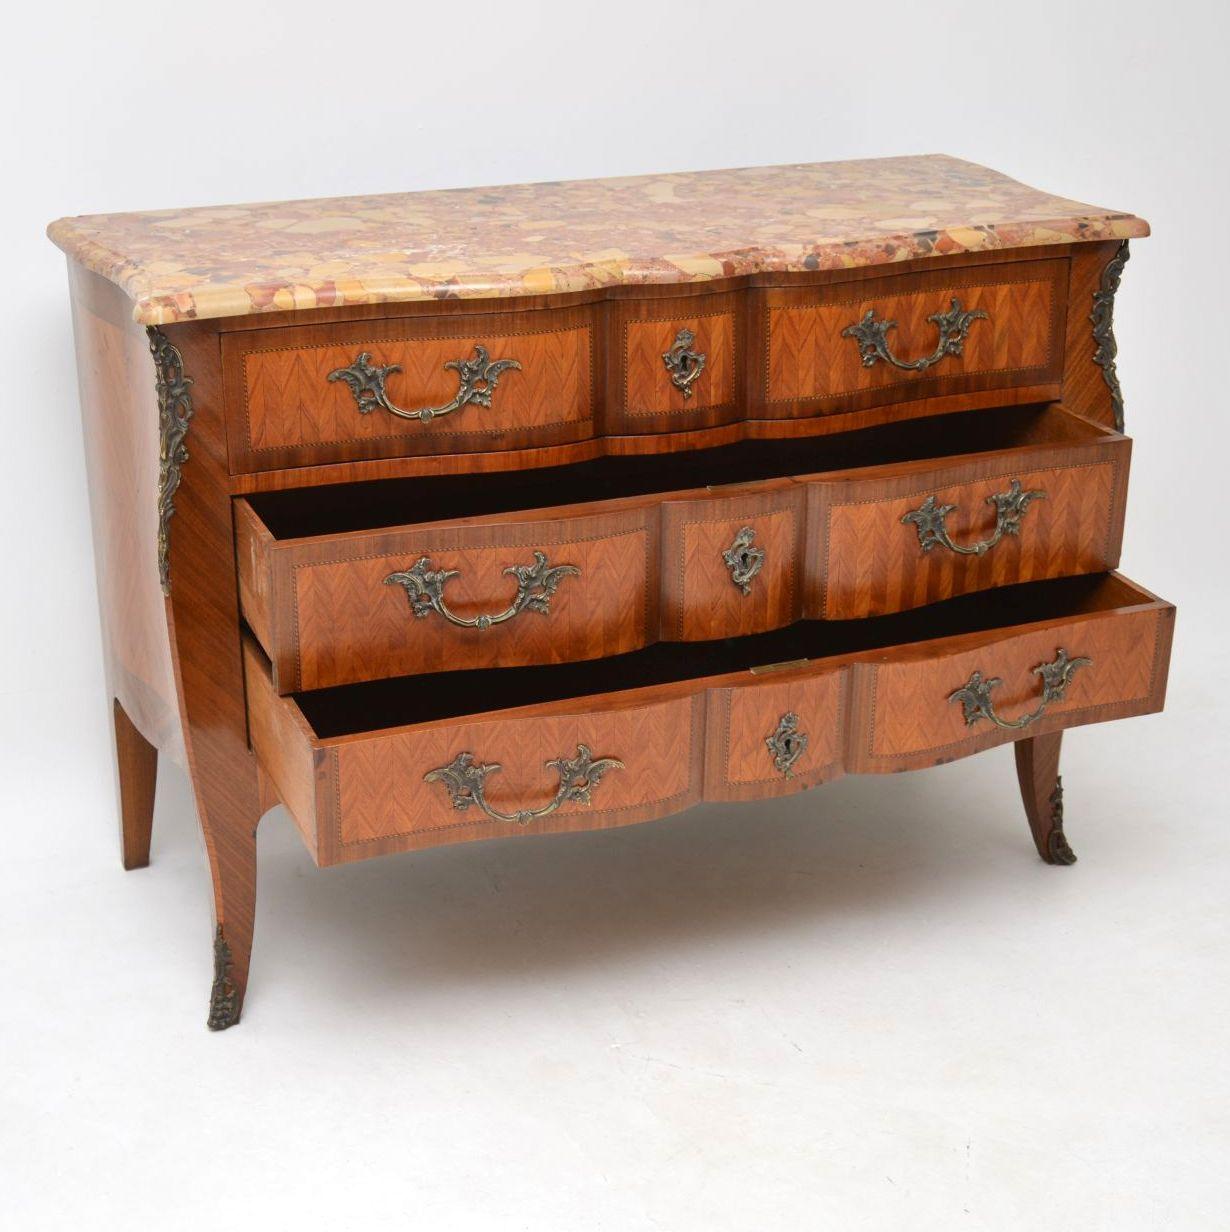 Victorian Antique French Inlaid Marble-Top Secretaire Commode